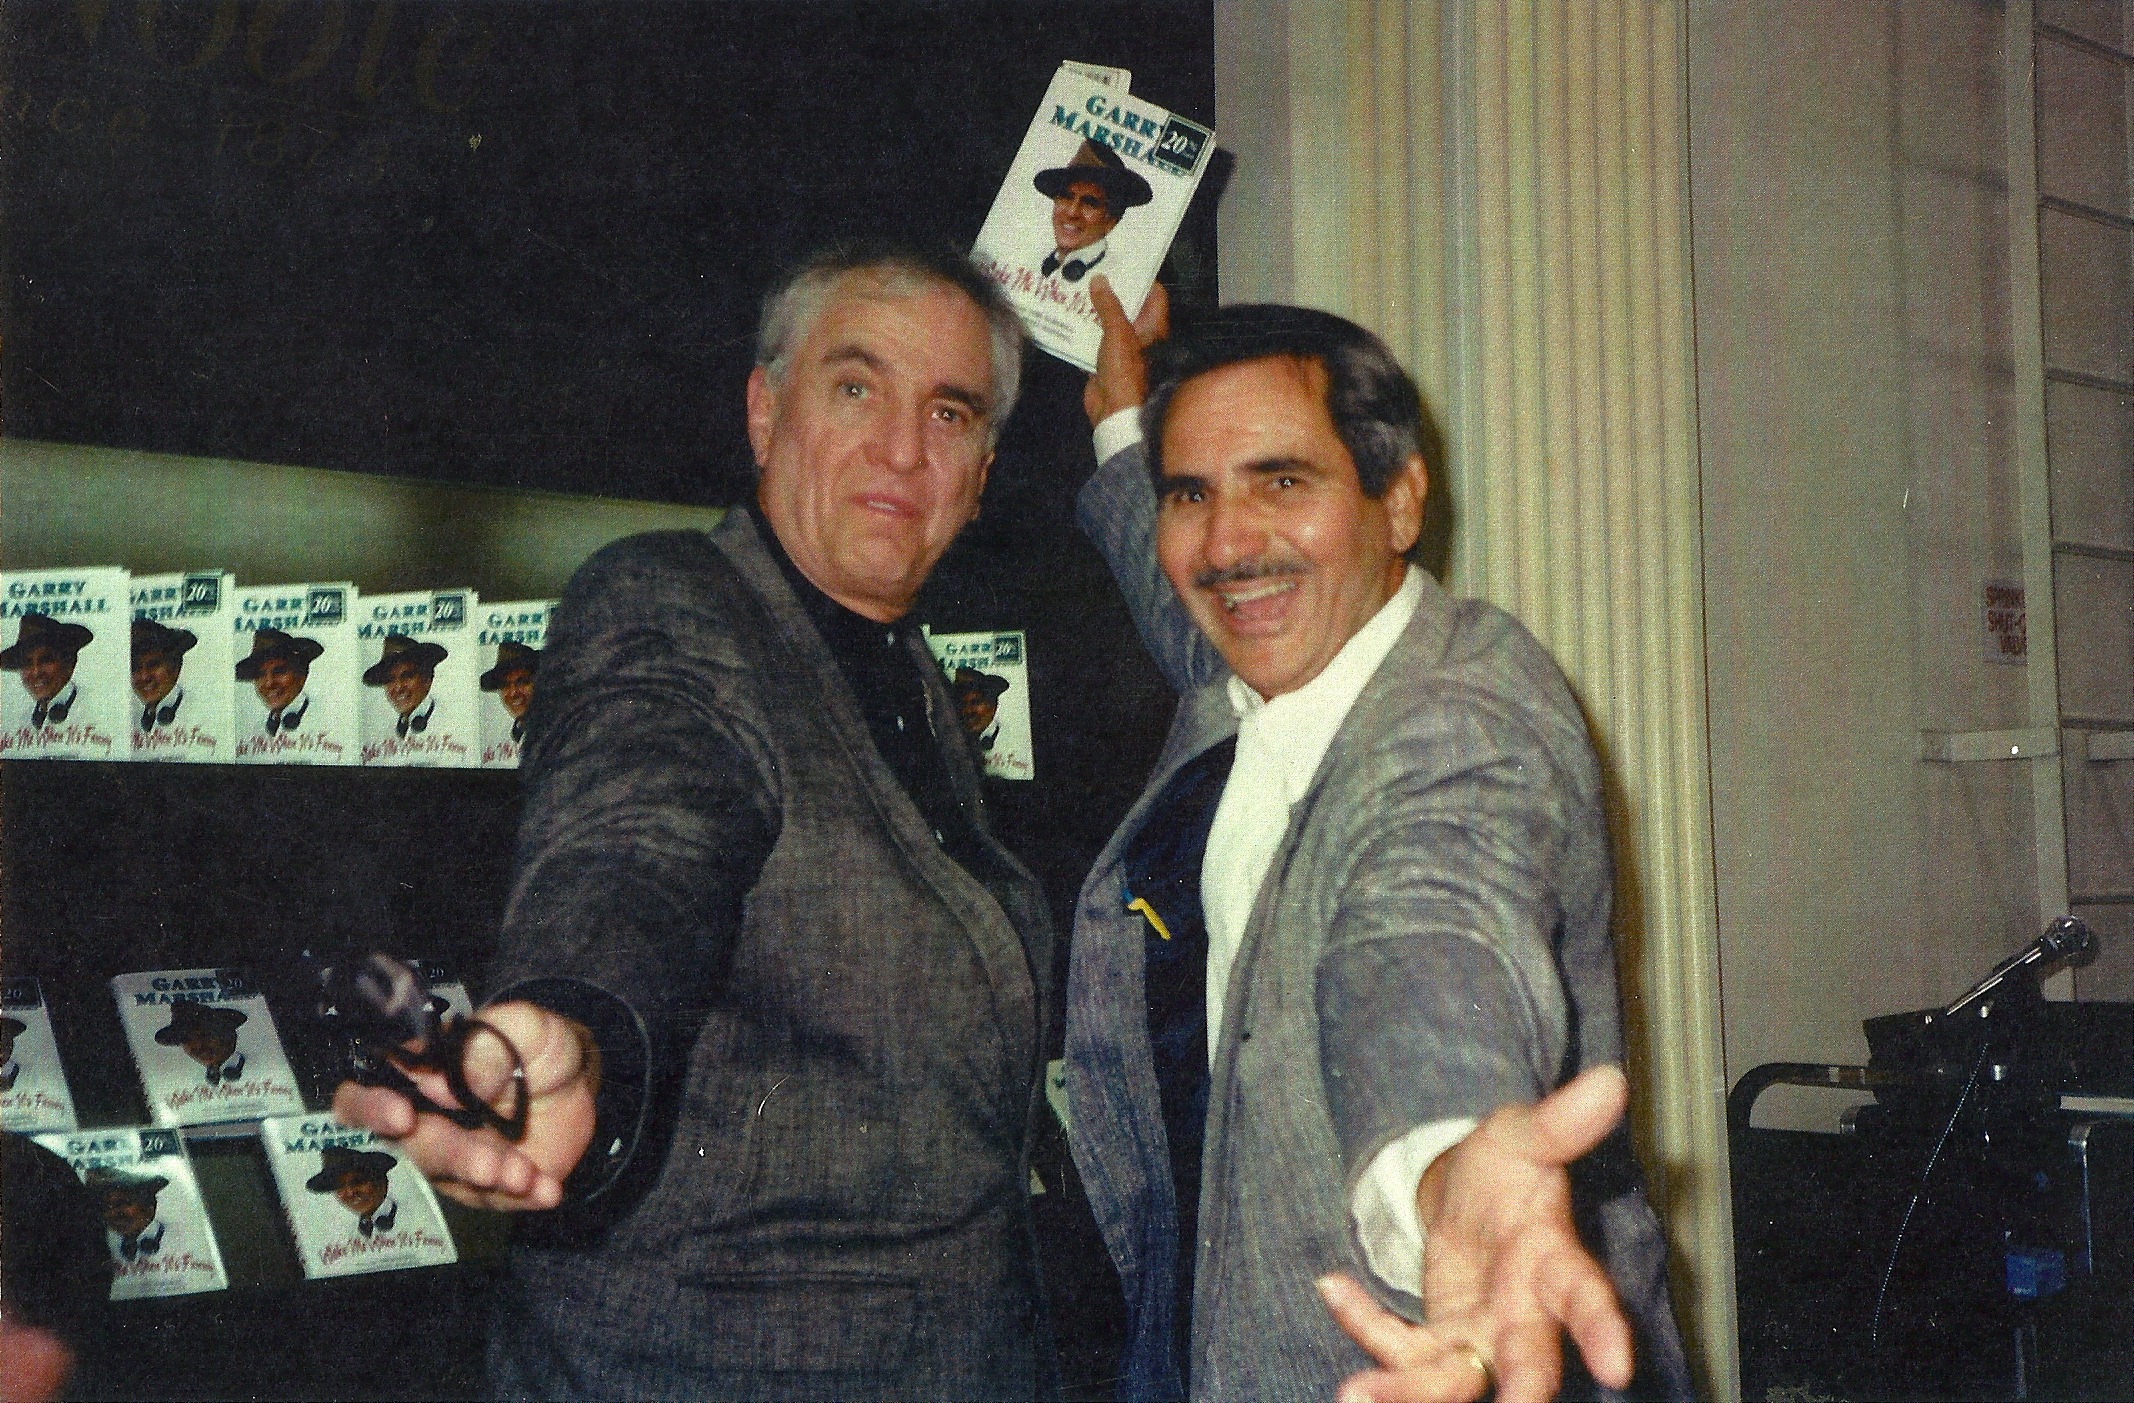 From(L to R)The great Garry Marshall and Richard Godfather Jimmy Anglisano.Garry and Jimmy had a comedy group called the heartburns.Garry is also responsible for starting Richard's career and wrote about Richard in 